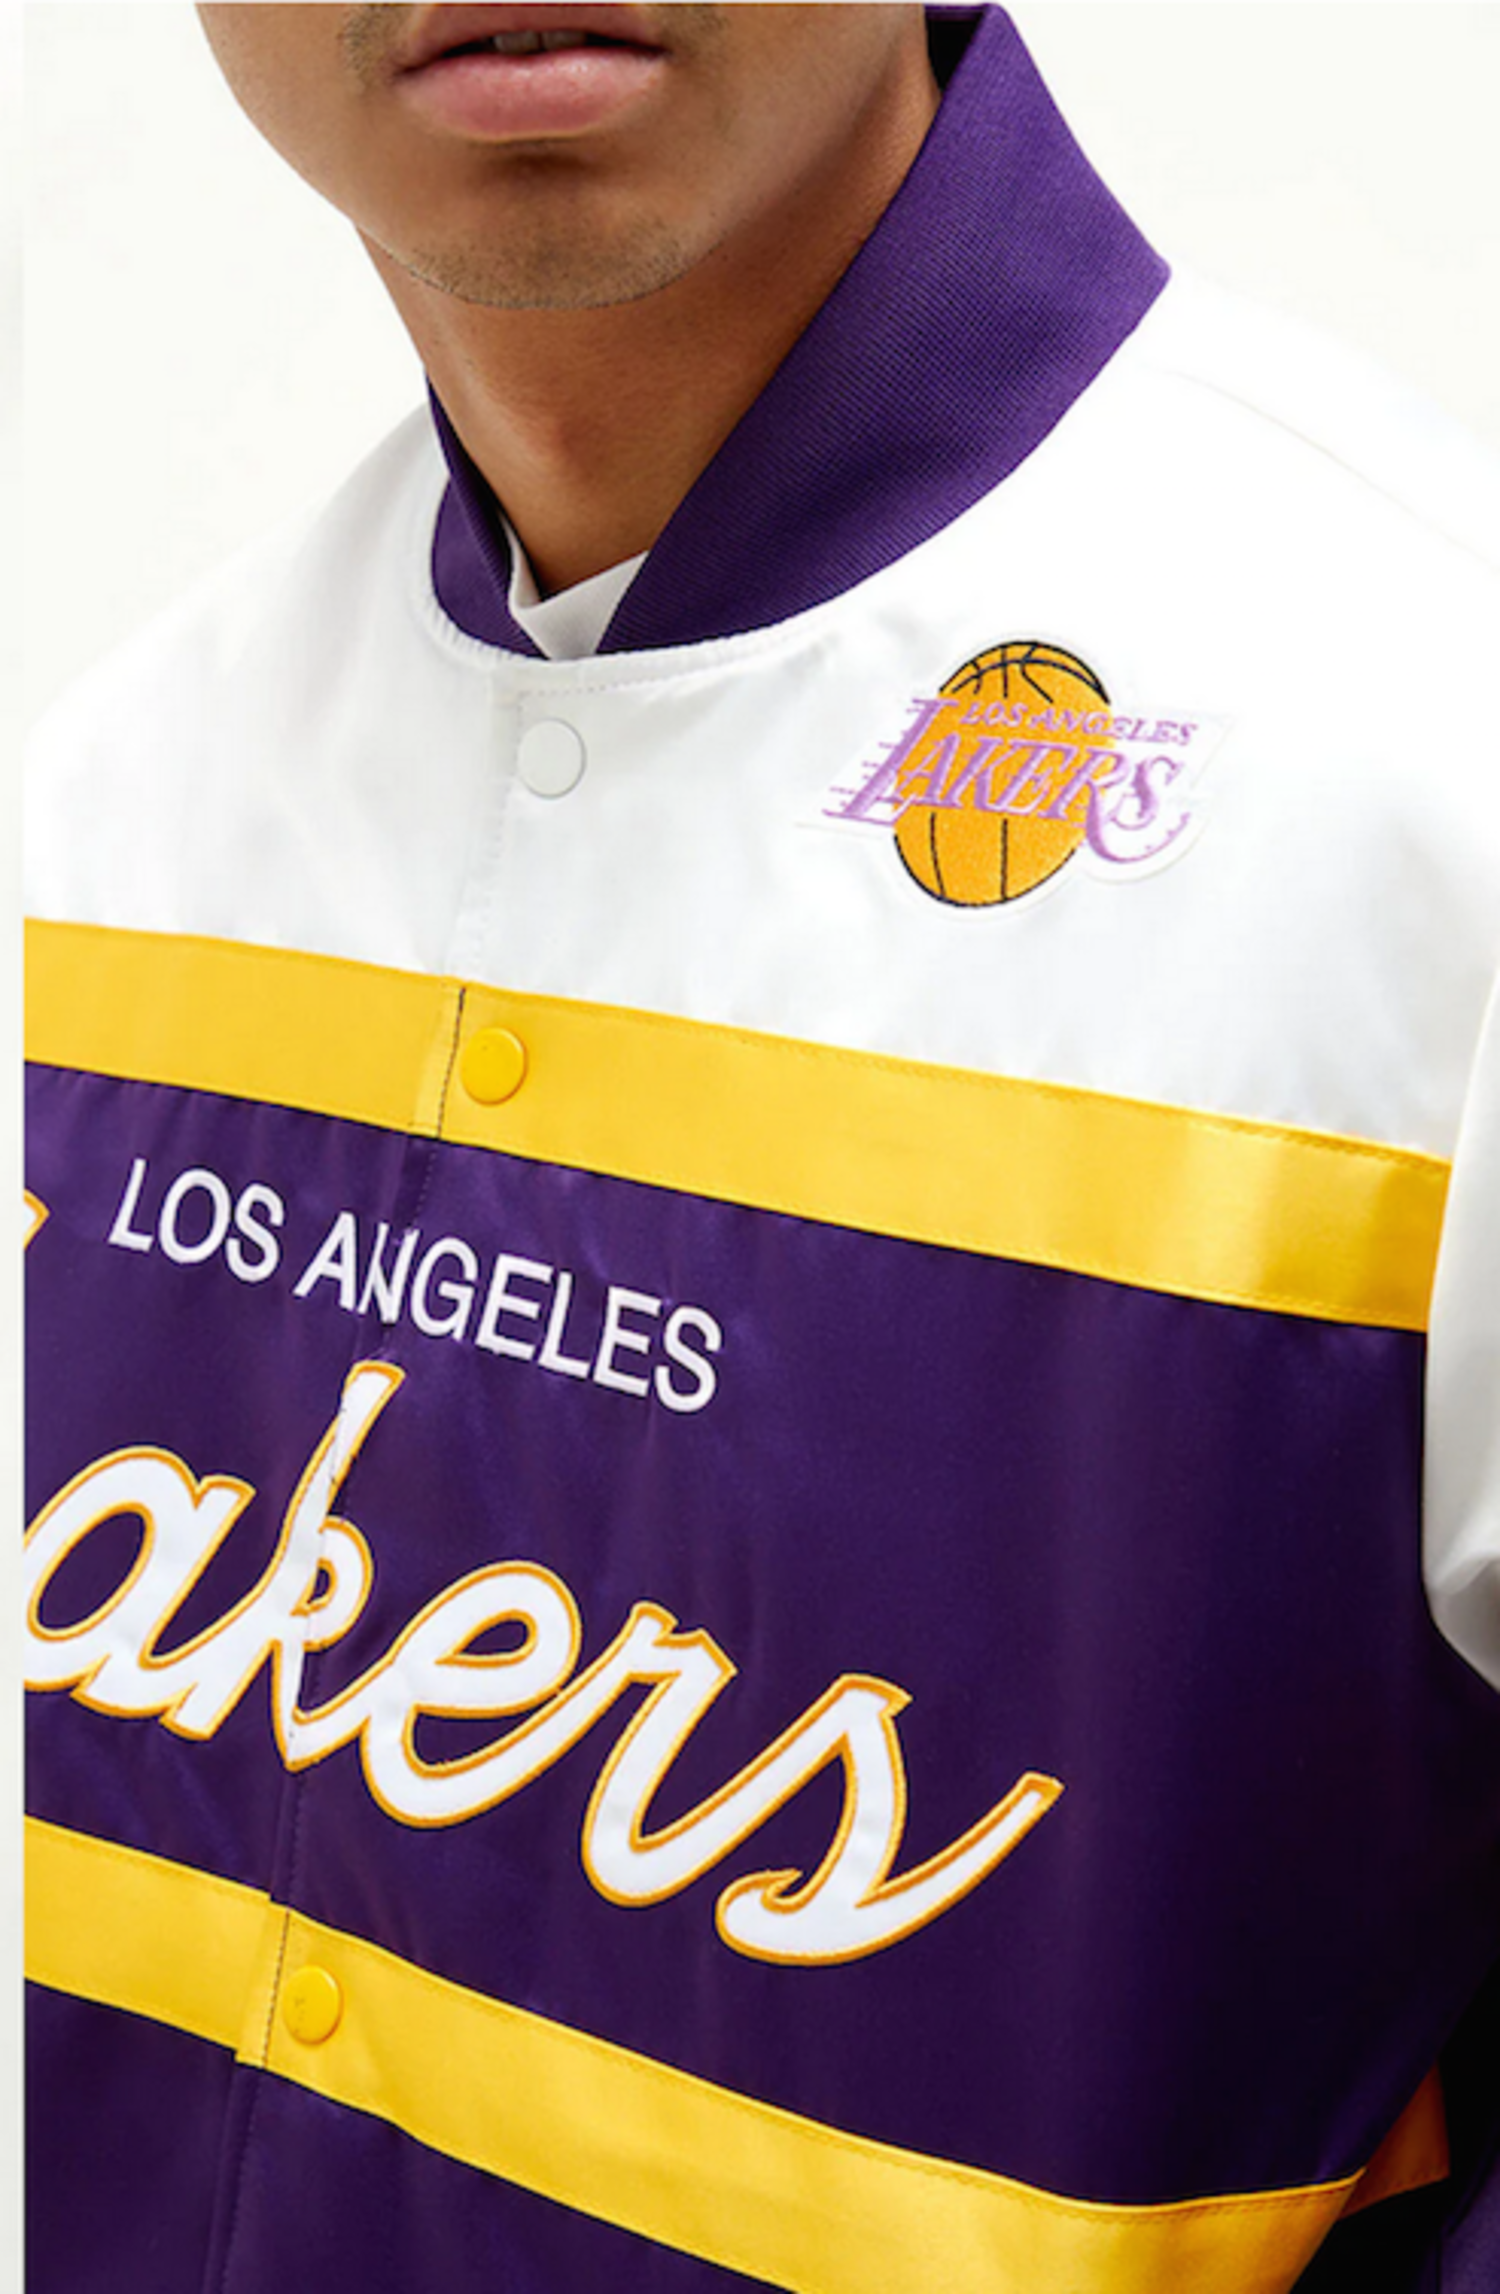 Mitchell & Ness Los Angeles Lakers Lightweight Satin Jacket white